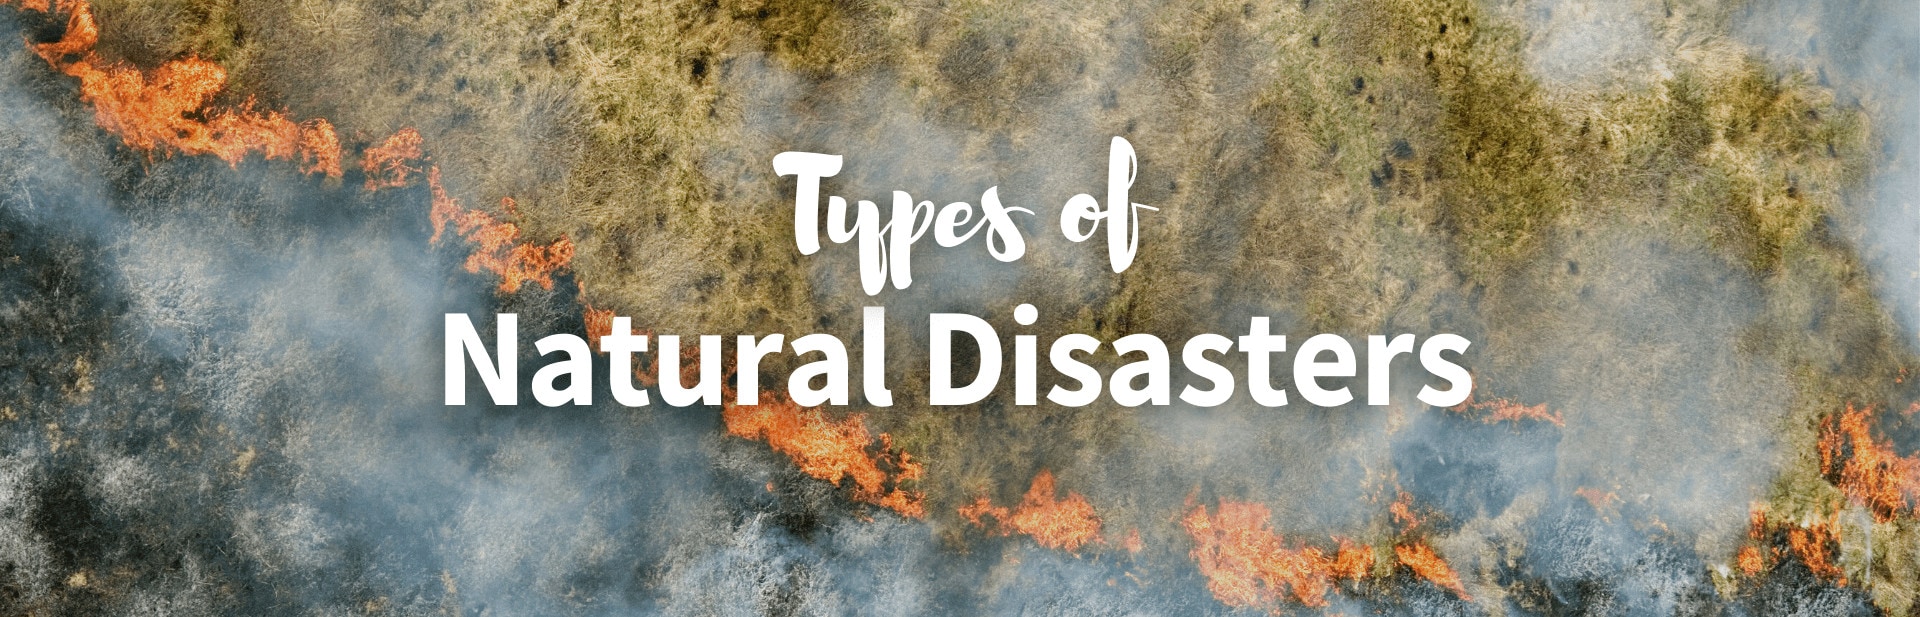 24 Types of Natural Disasters That You Need To Know